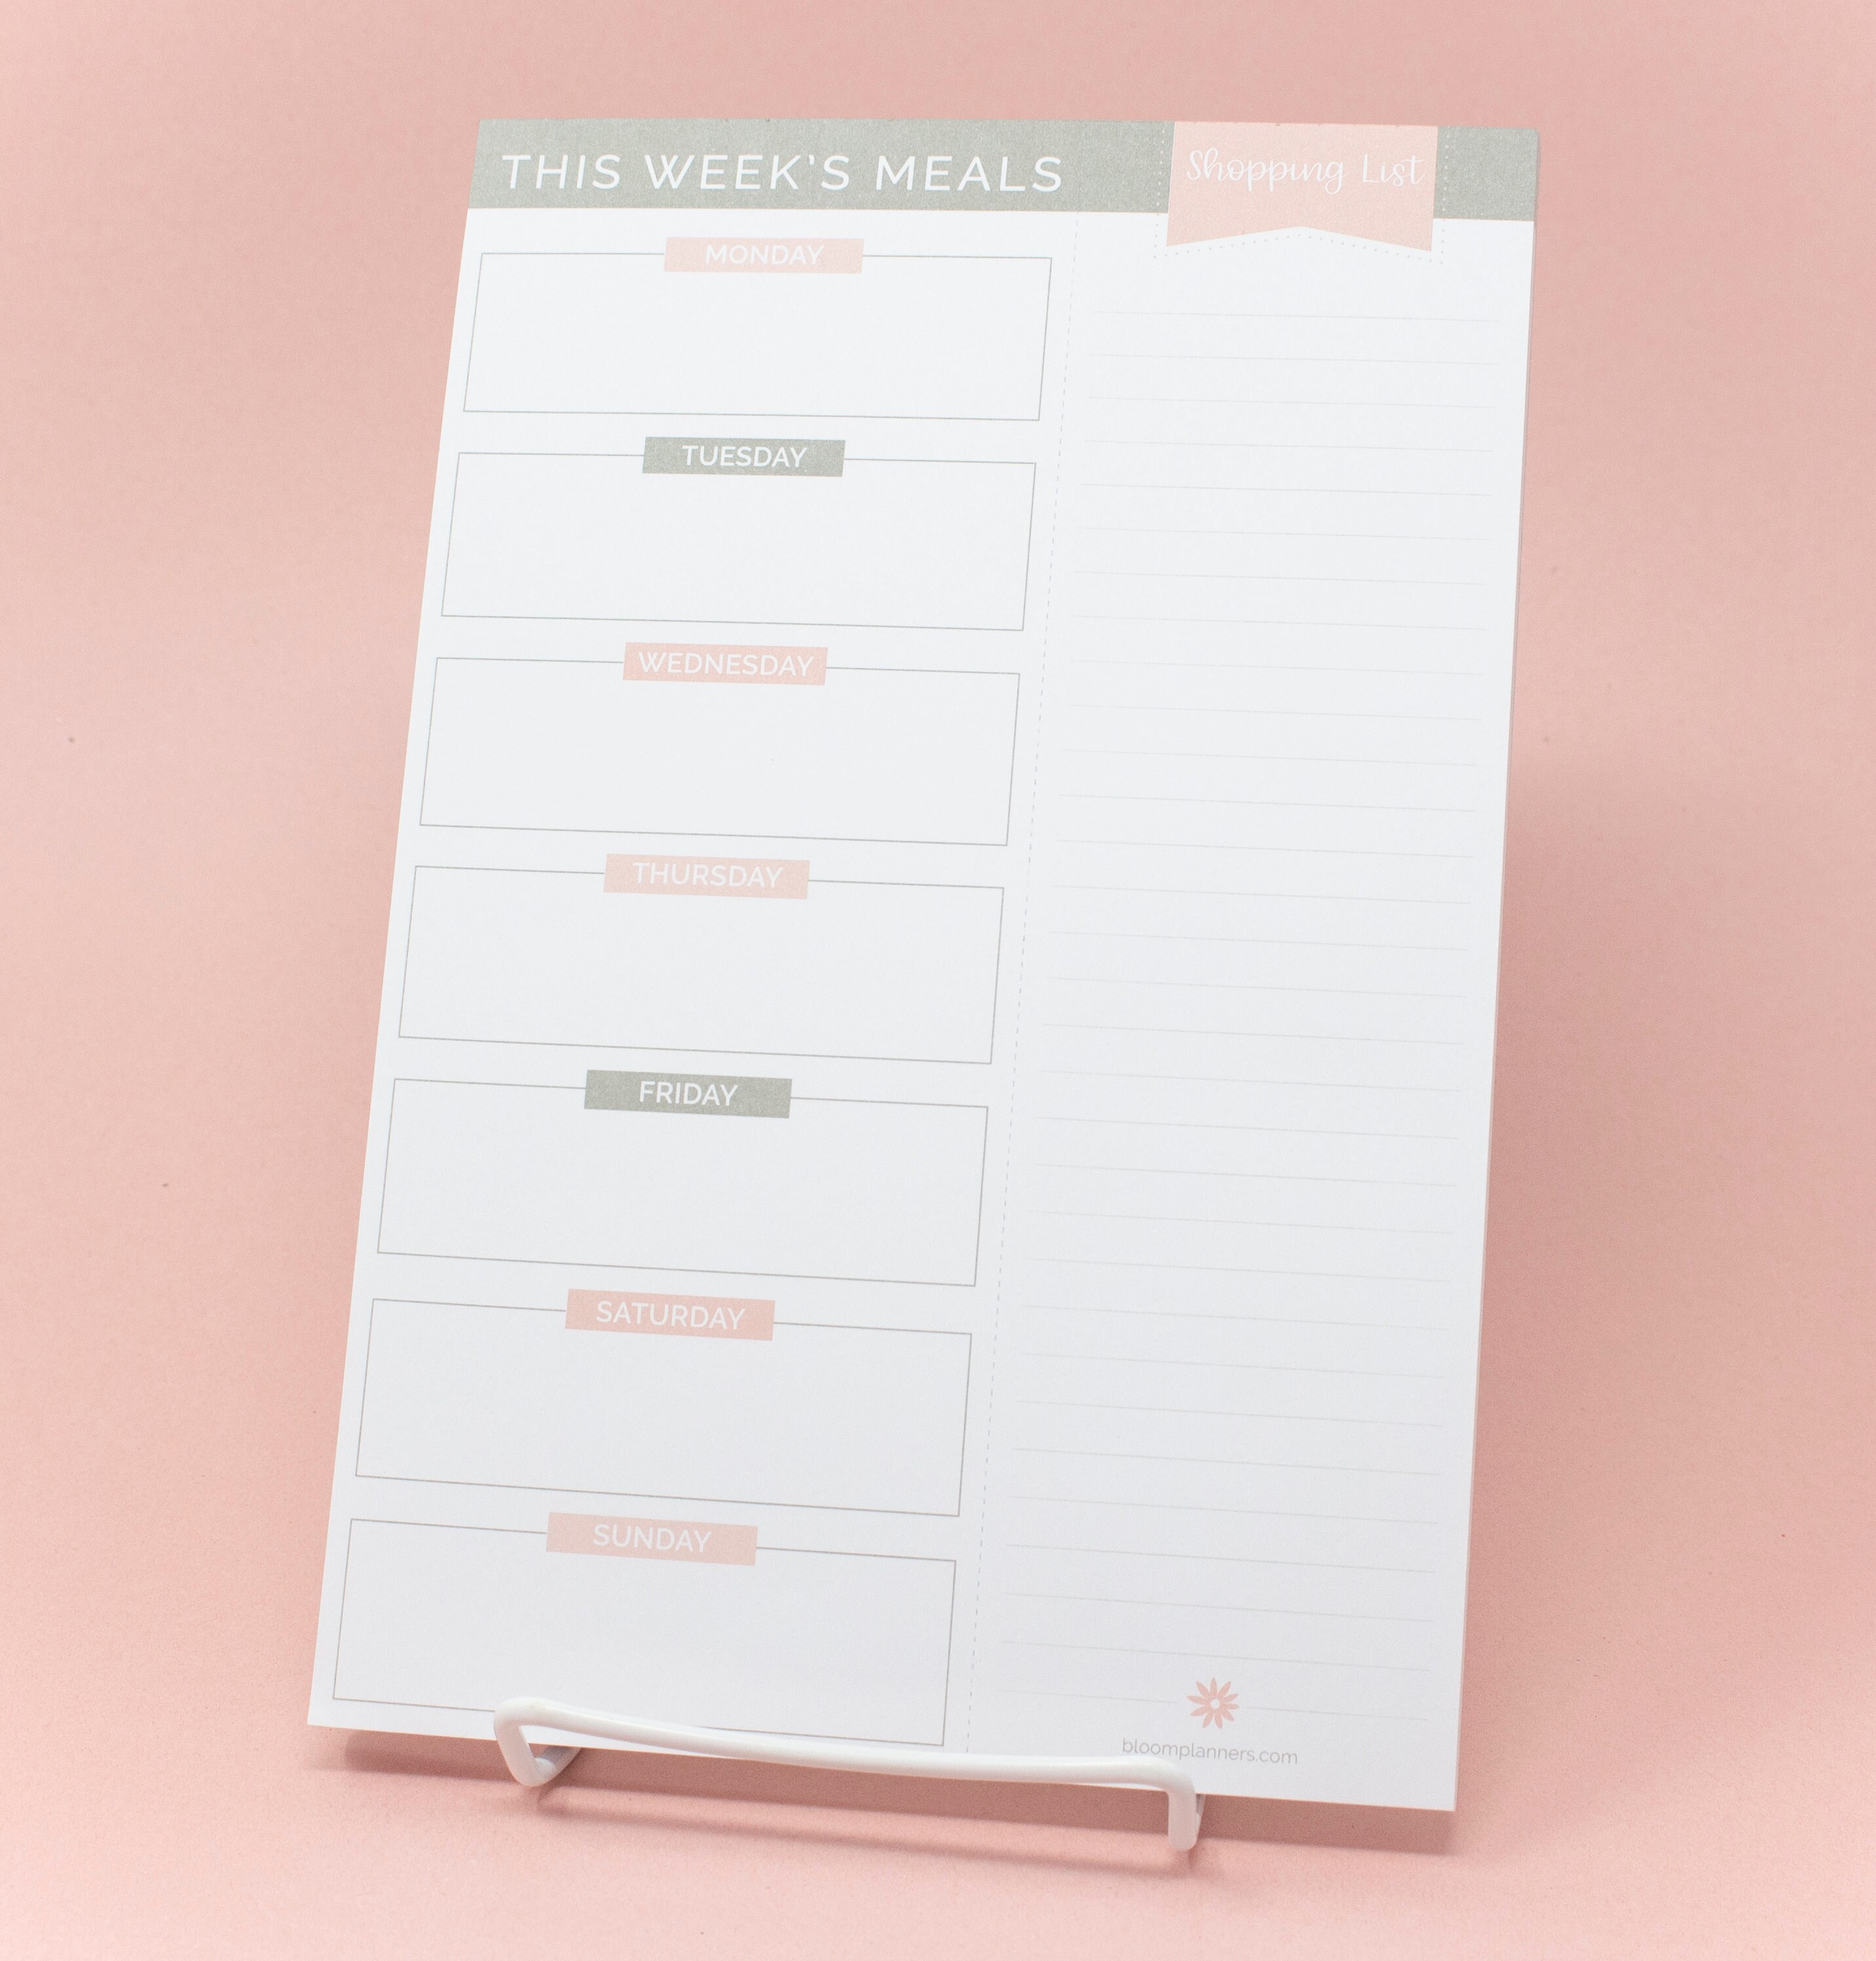 bloom daily planners Weekly Meal Planning Pad - Magnetic Hanging  Refrigerator Menu Planner with Tear-Off Sheets & Perforated Grocery  Shopping Lists 